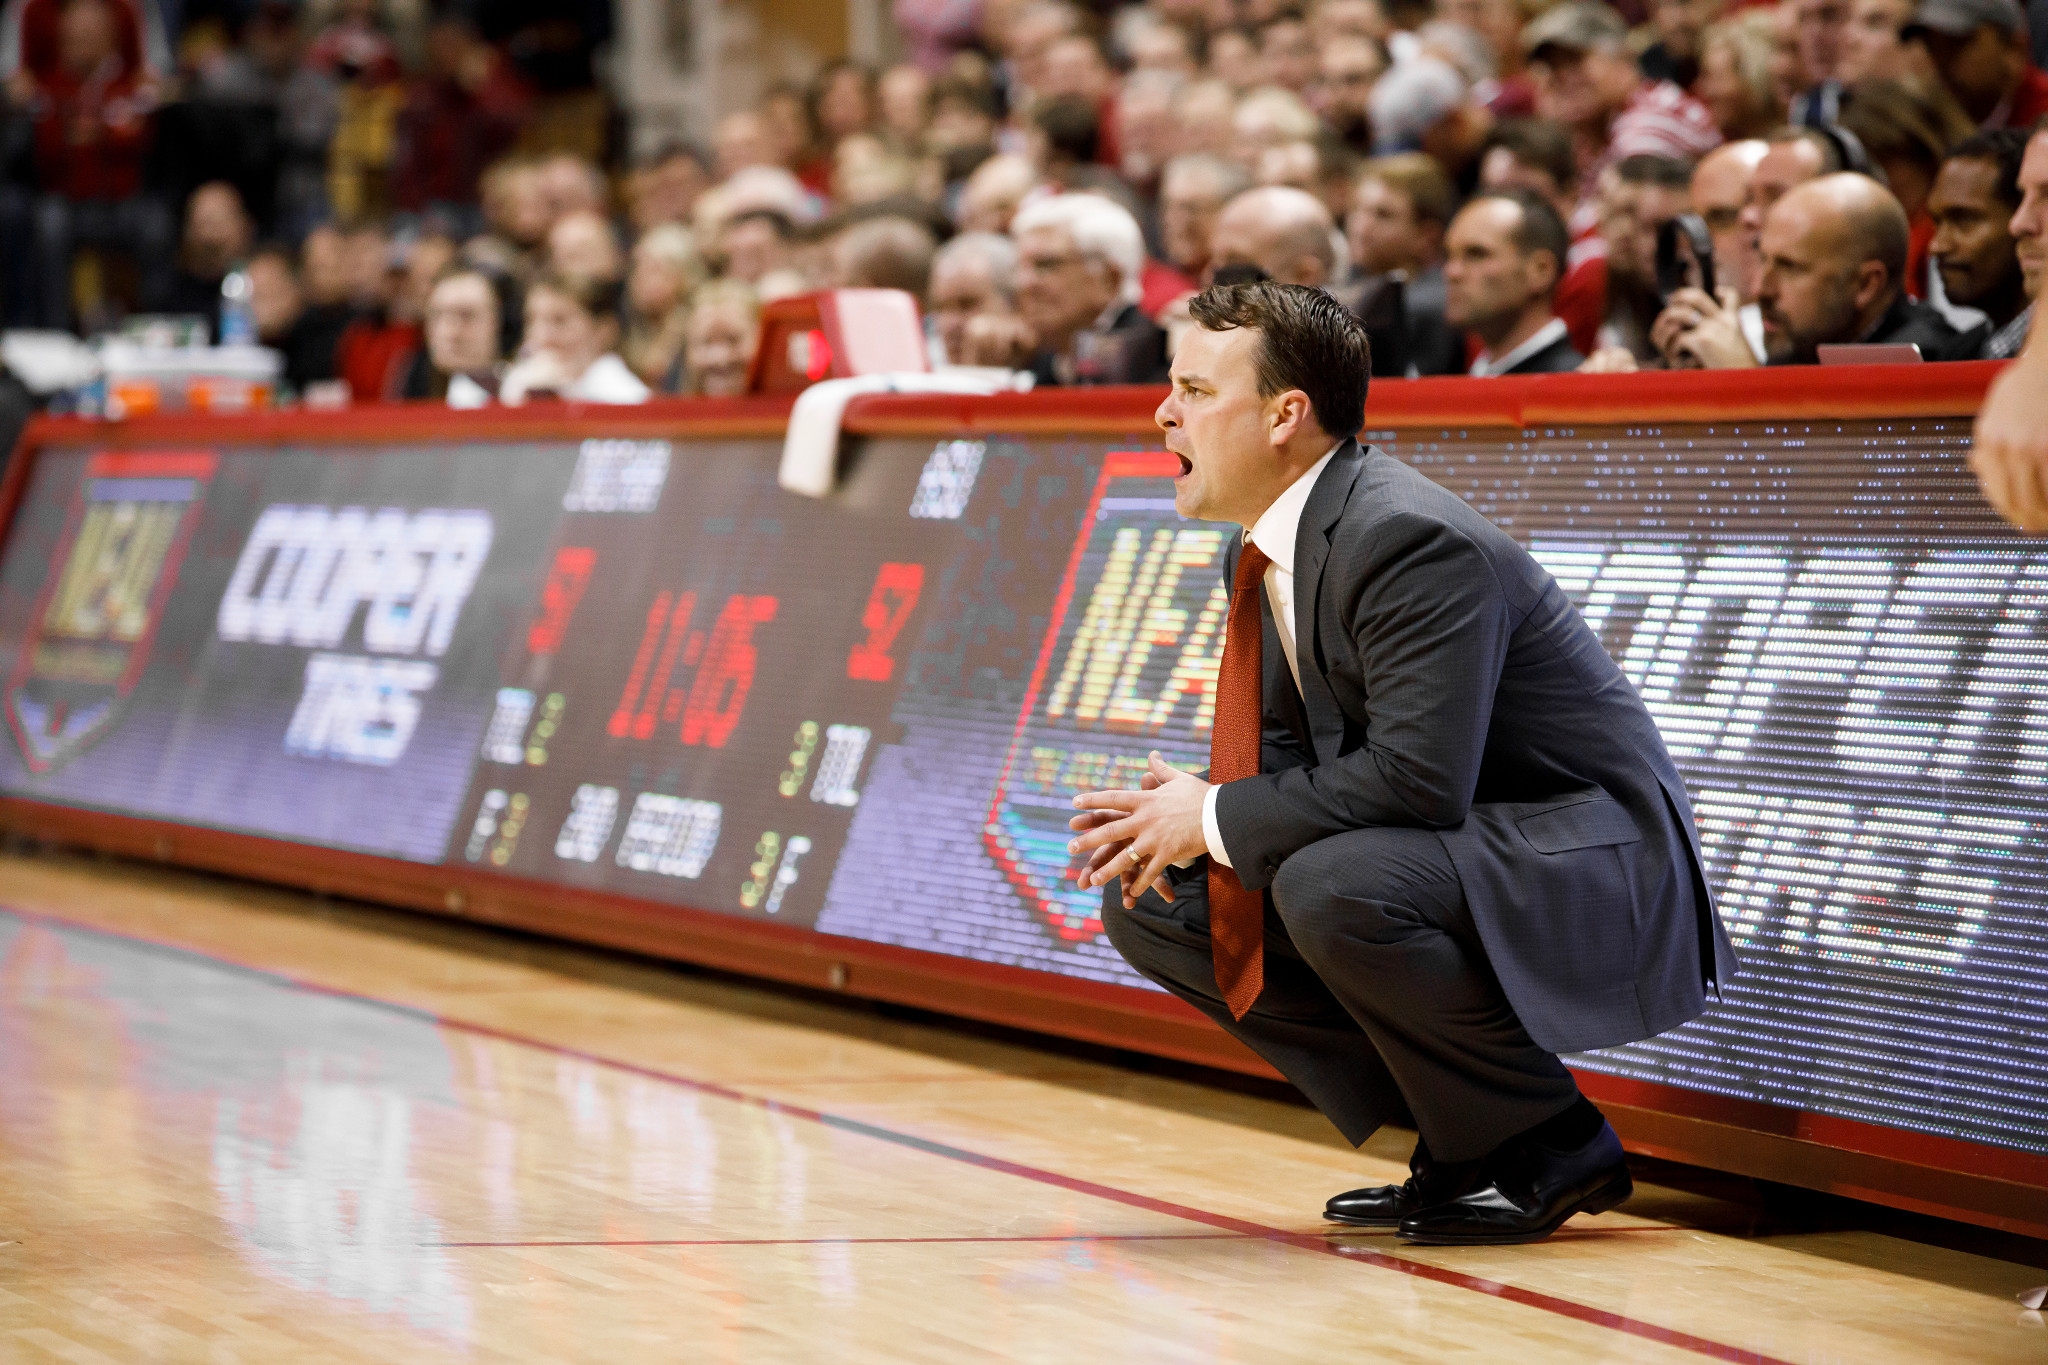 Archie Miller shouts plays at the team during a game